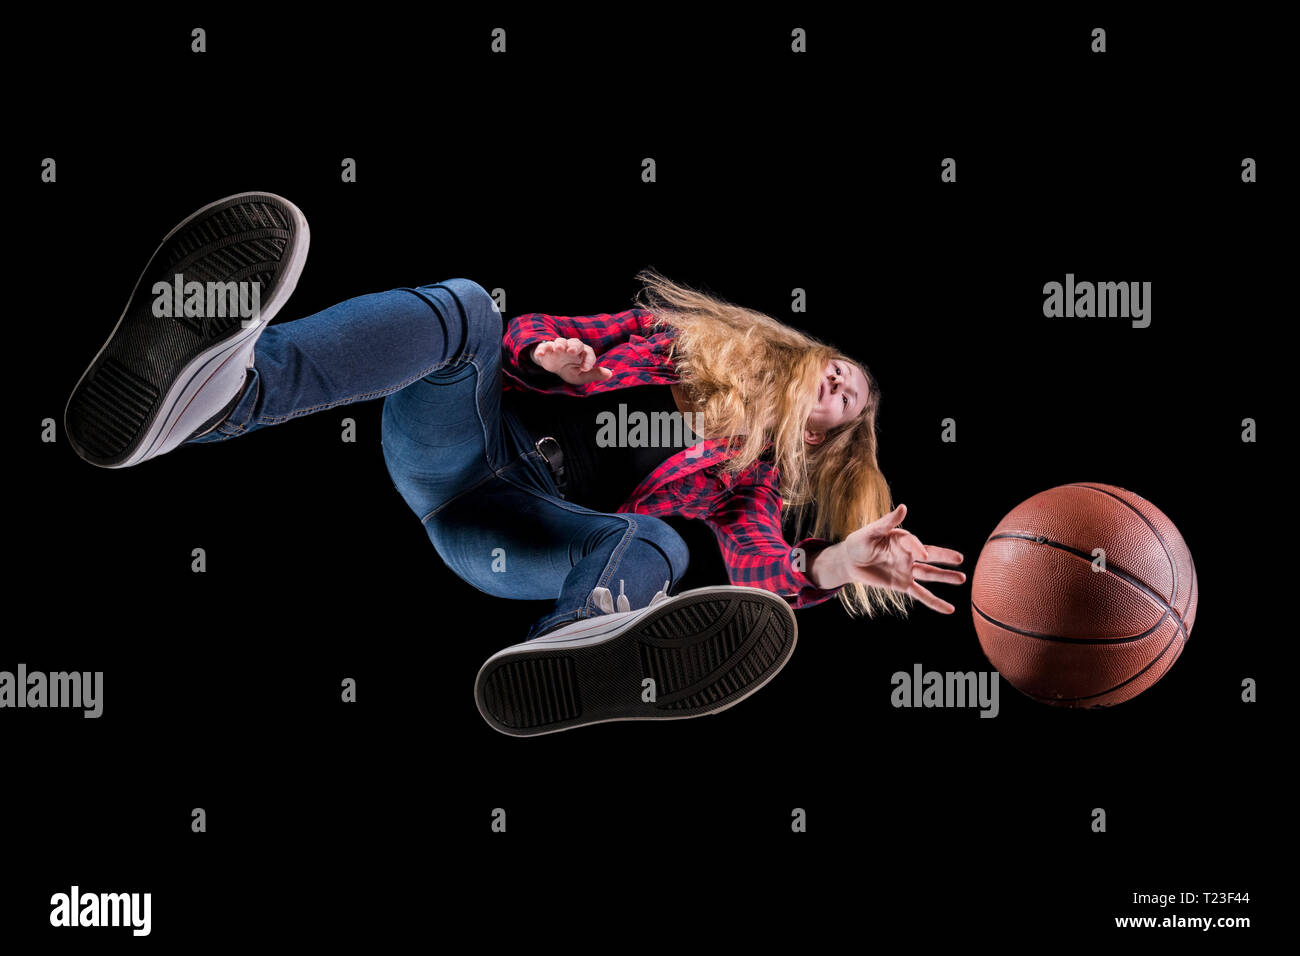 Basketball player against black background seen from below Stock Photo